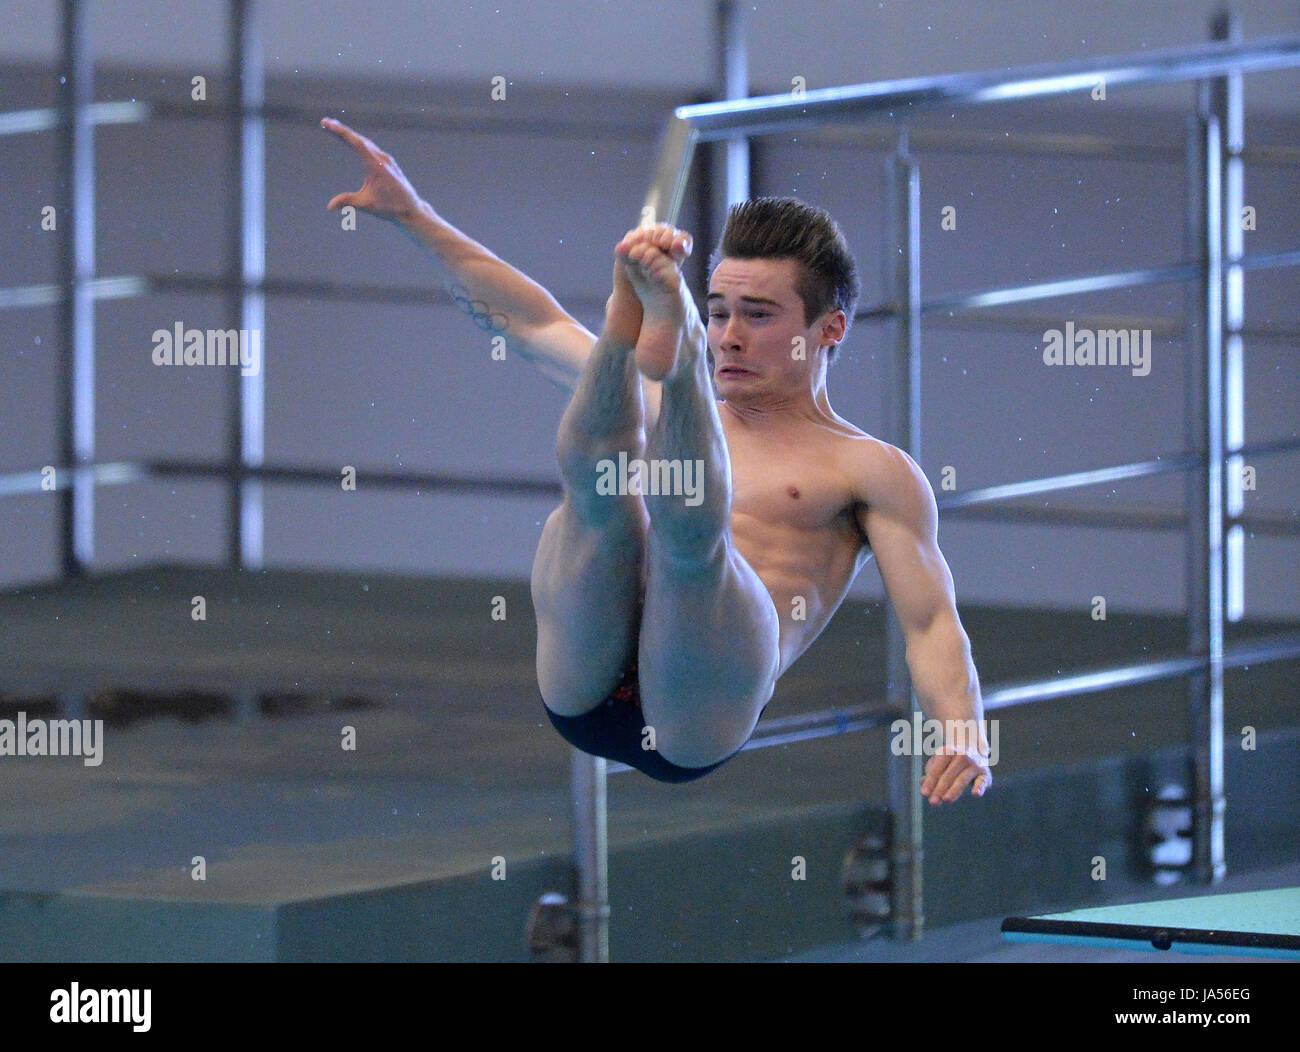 Daniel Goodfellow competing in the Men's 3m final during the British Diving Championships at the Royal Commonwealth Pool, Edinburgh. Stock Photo